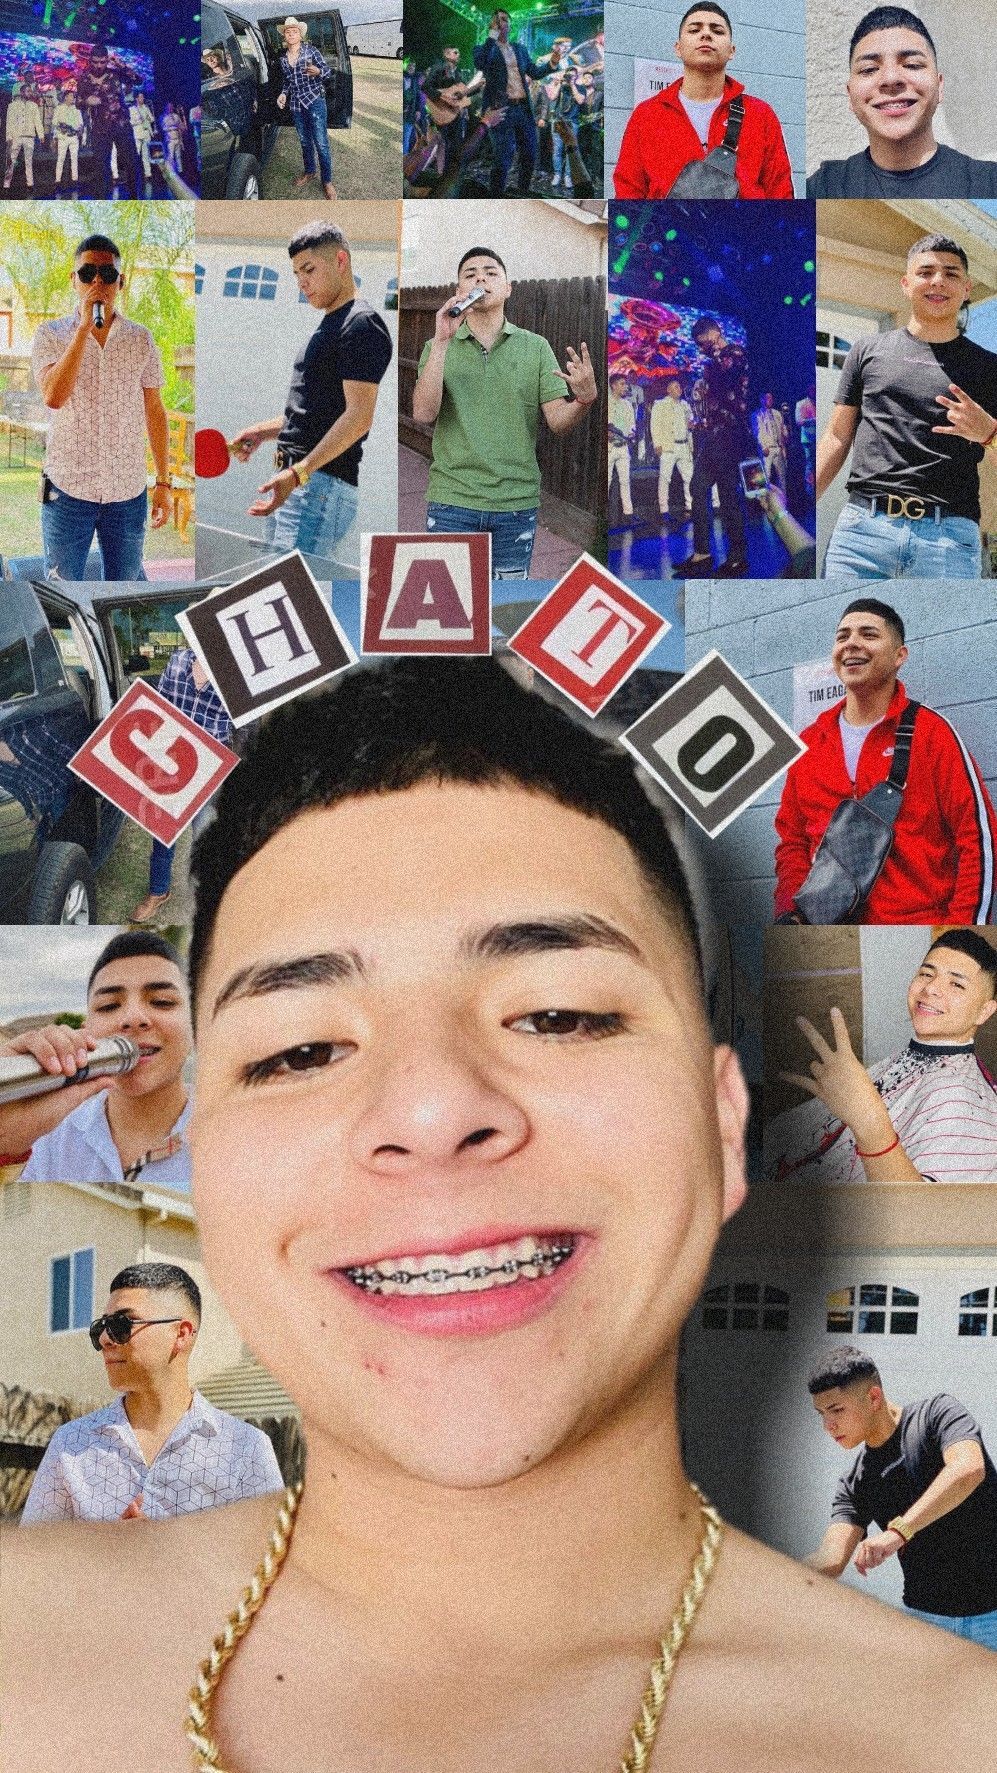 chato from marca mp. Wallpaper iphone cute, Hip hop poster, Cute mexican boys